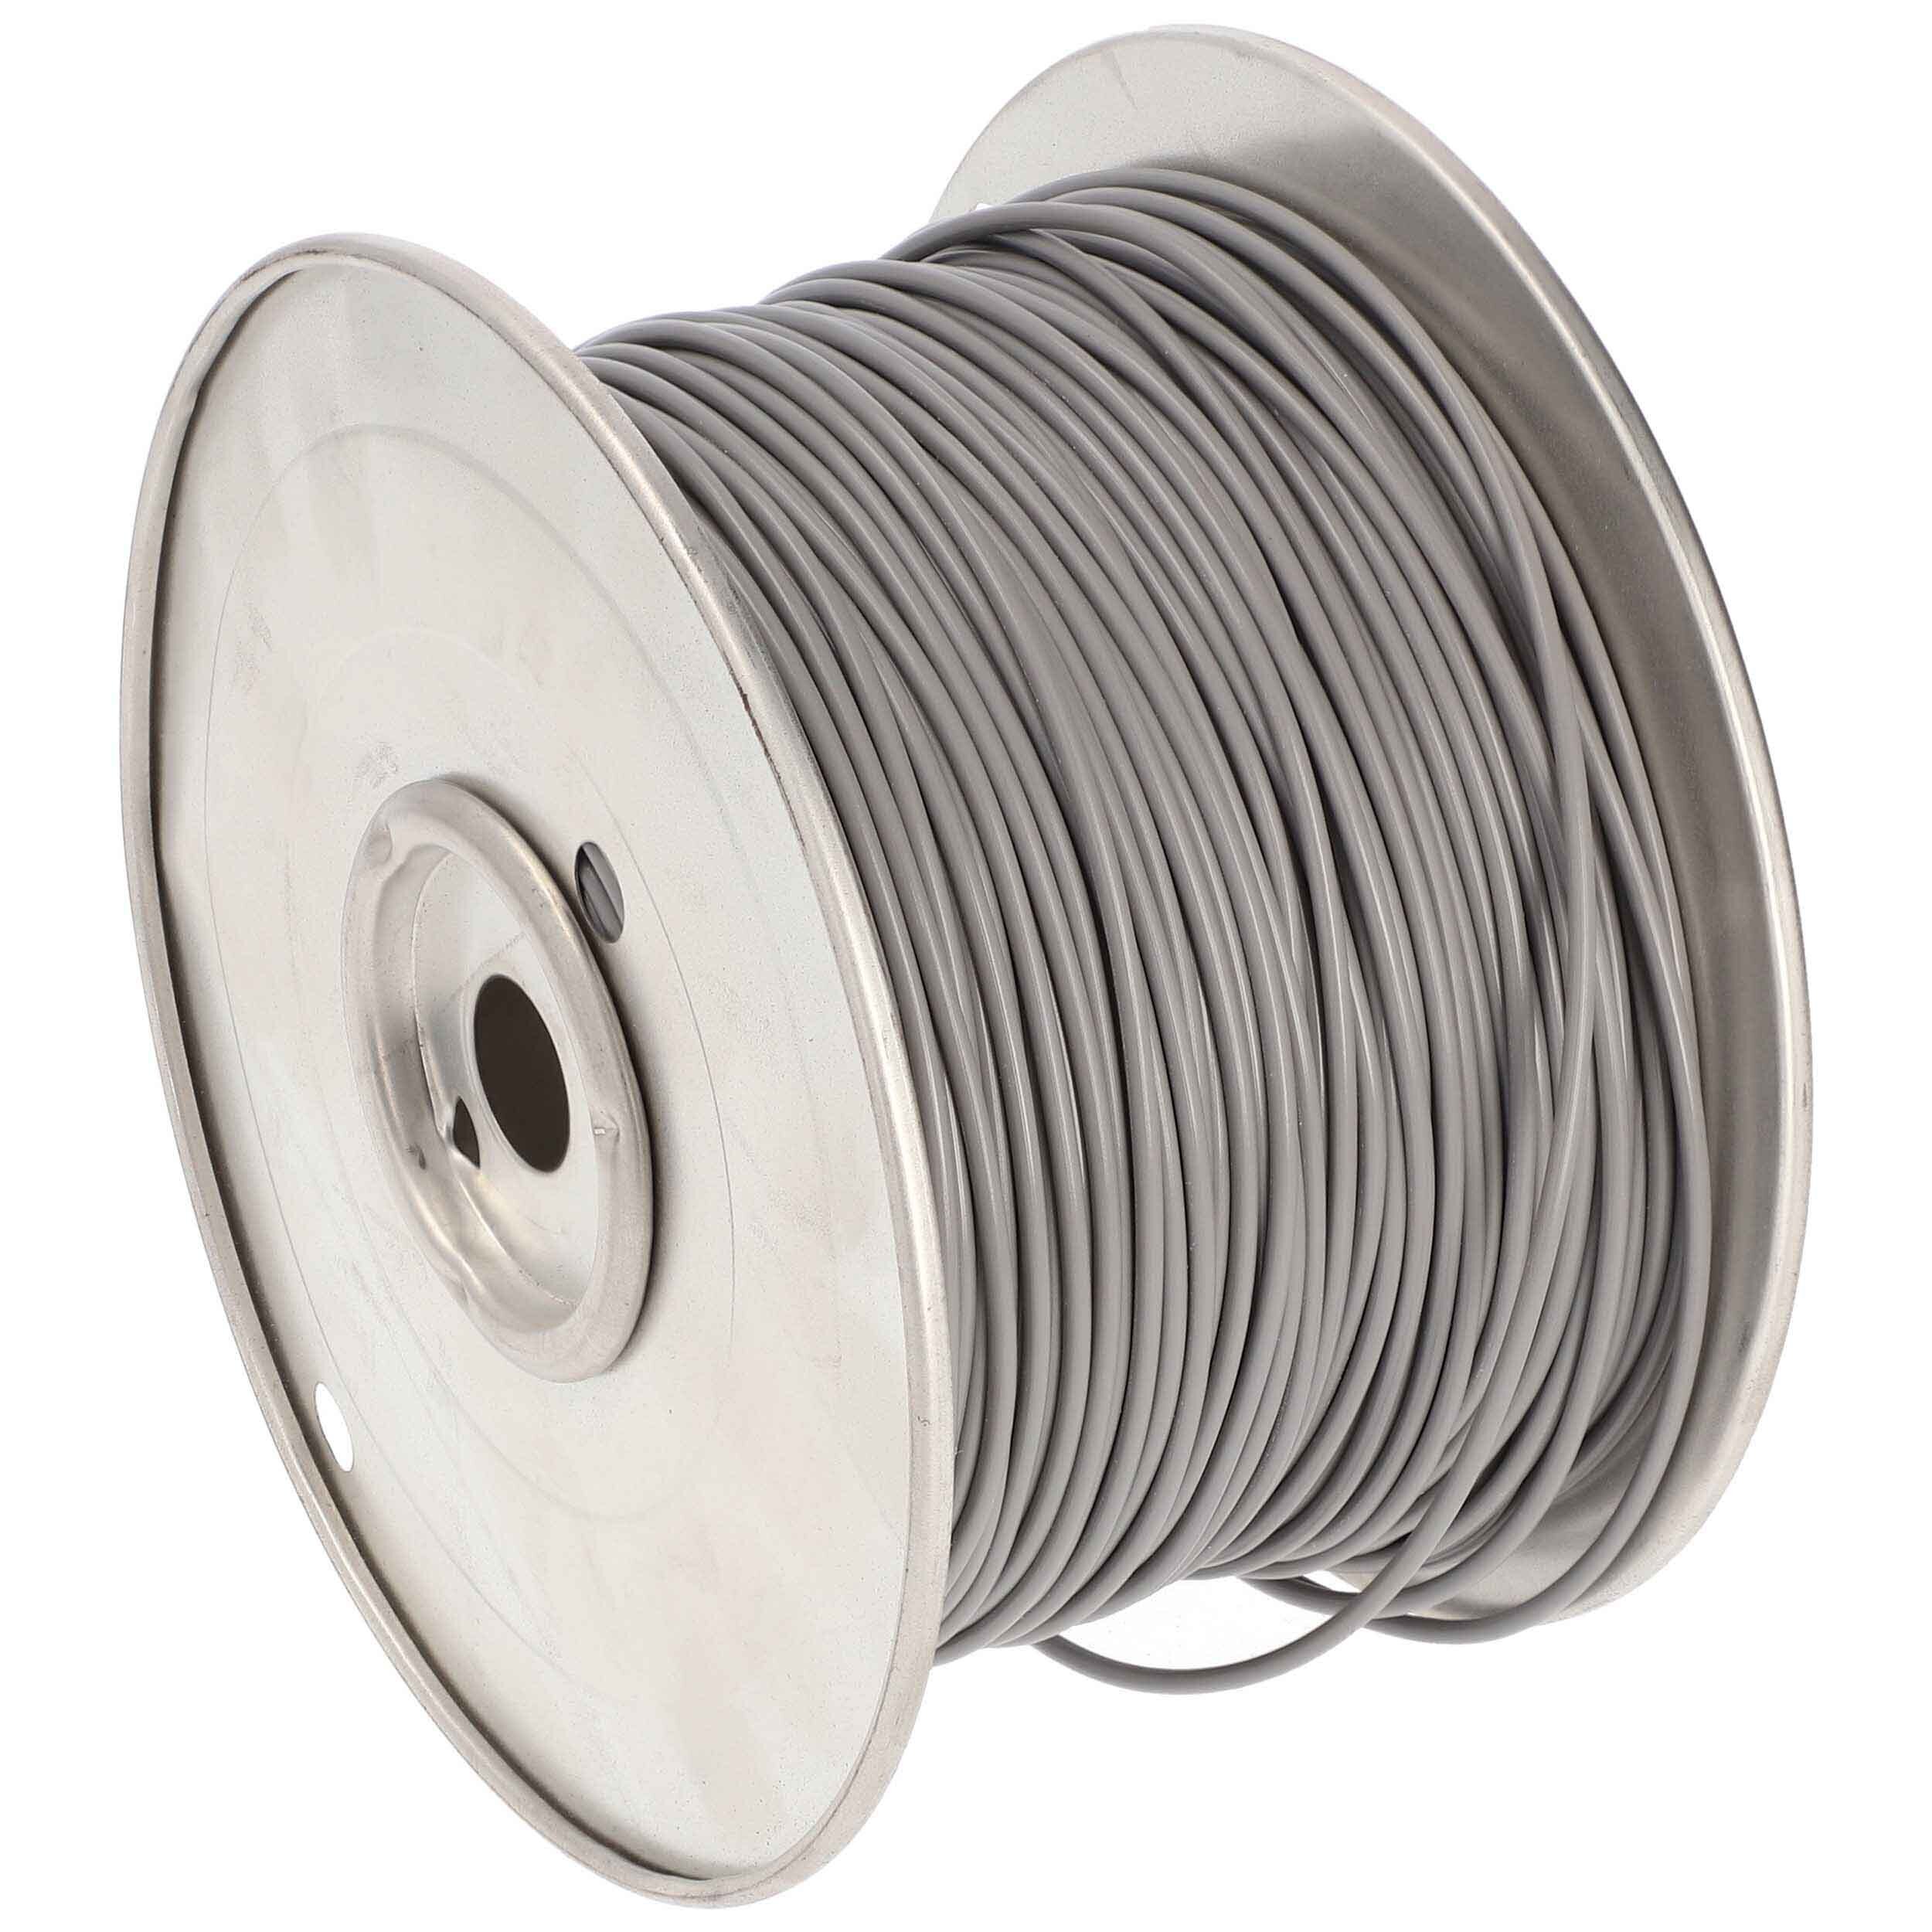 16 GA US GPT ALL COPPER PRIMARY WIRE GRAY - Coil of 500 FT